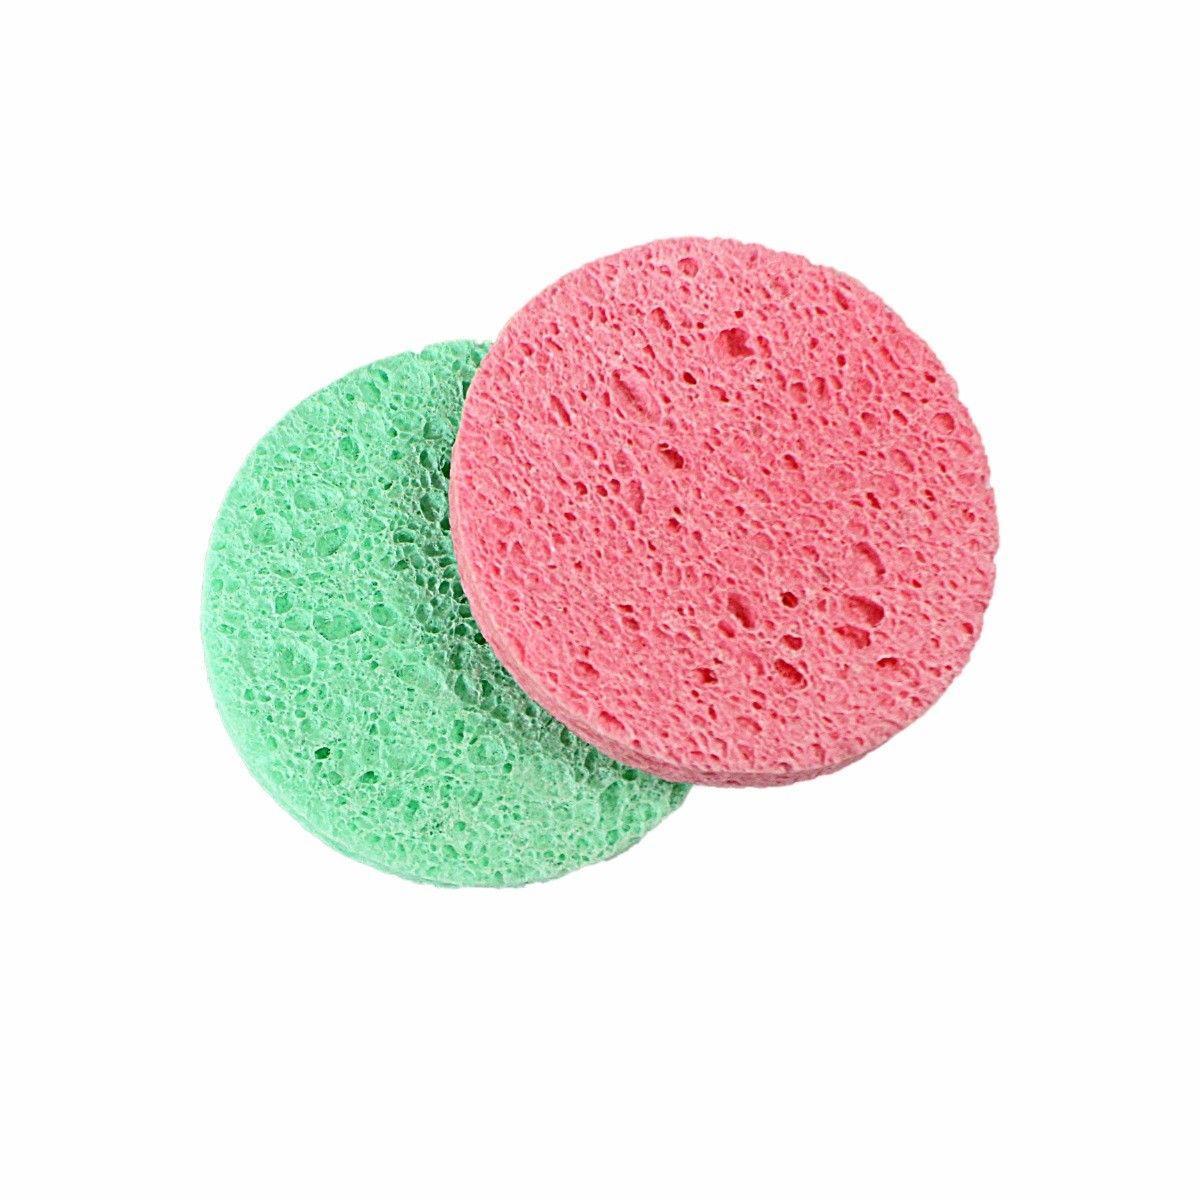 Cosmetic Make up Cleansing Sponge Pad Pack of 2 Assorted Designs and Colours 2868 (Large Letter Rate)